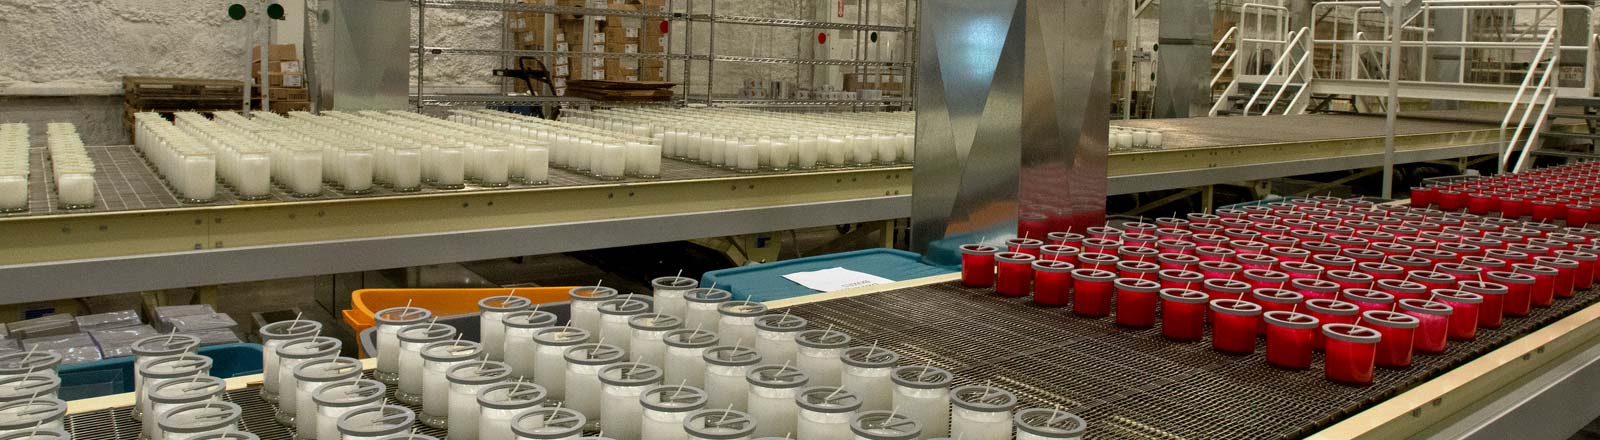 Photo of Kringle Candle's manufacturing facility in Bernardston, Massachusetts, showing candle jars on a conveyor belt.